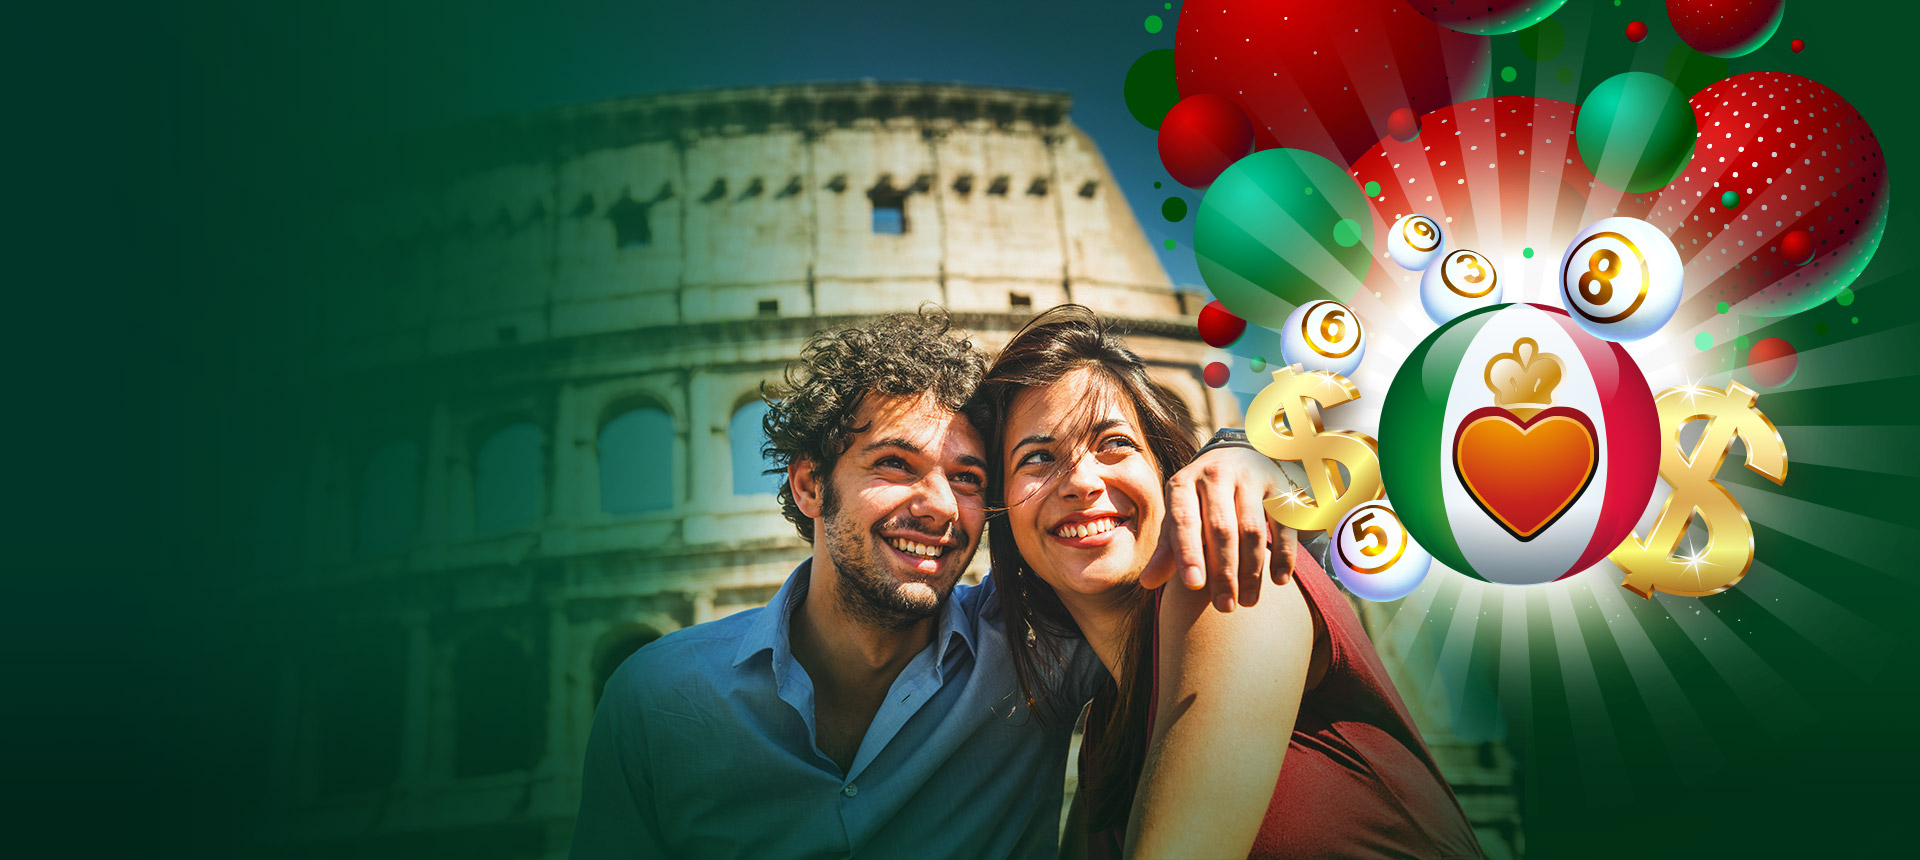 We bring you Italy's best lottery! €253 MILLION JACKPOT! Play SuperEnalotto now!